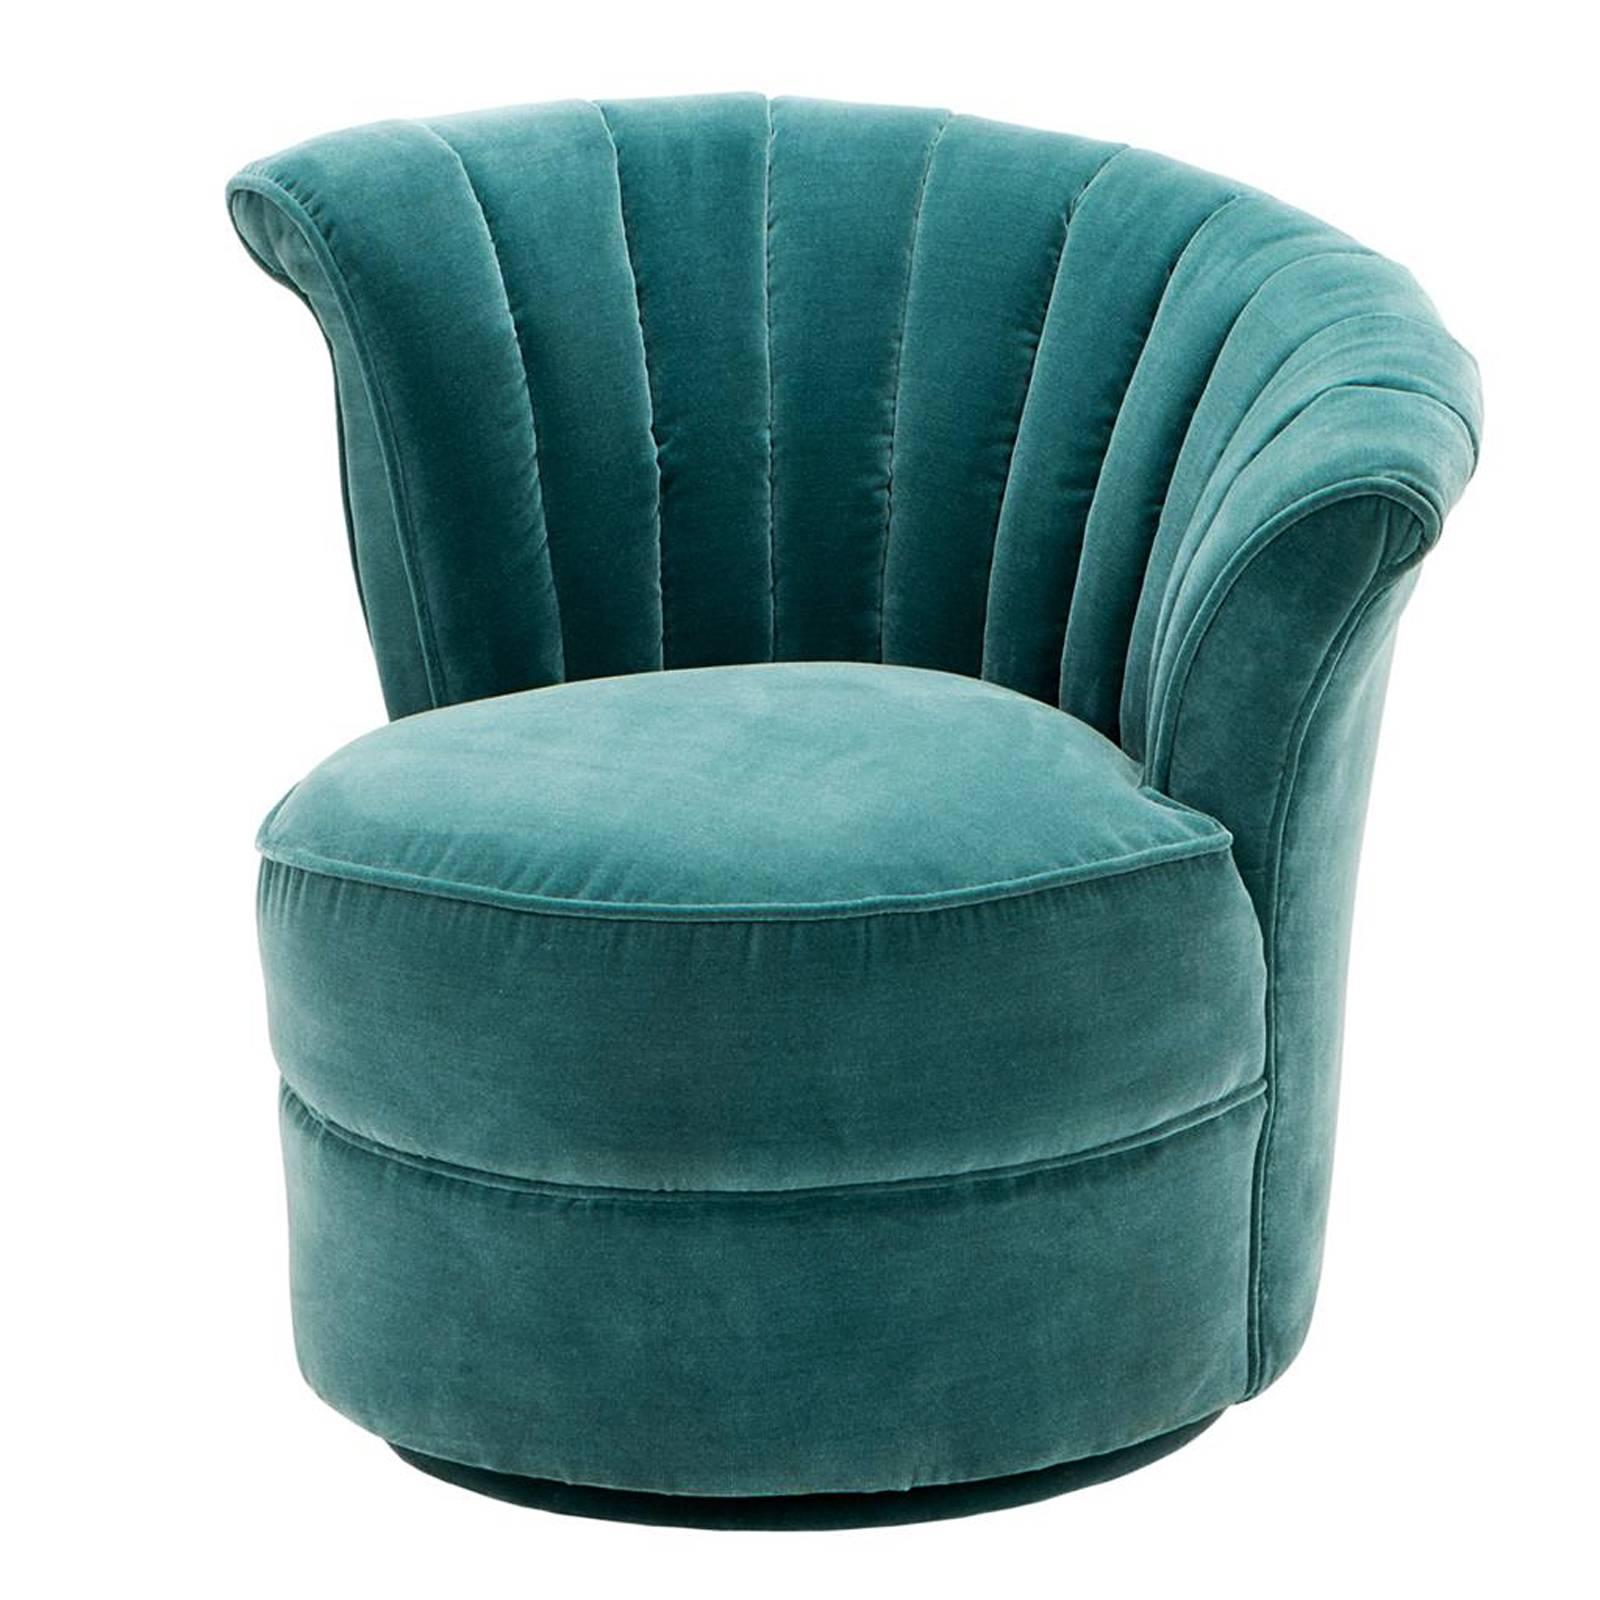 Wing chair right with turquoise velvet fabric
with fire retardant treatment. Structure in 
solid wood. On swivel base.
Also available in black velvet fabric.
Also available in chair left.
